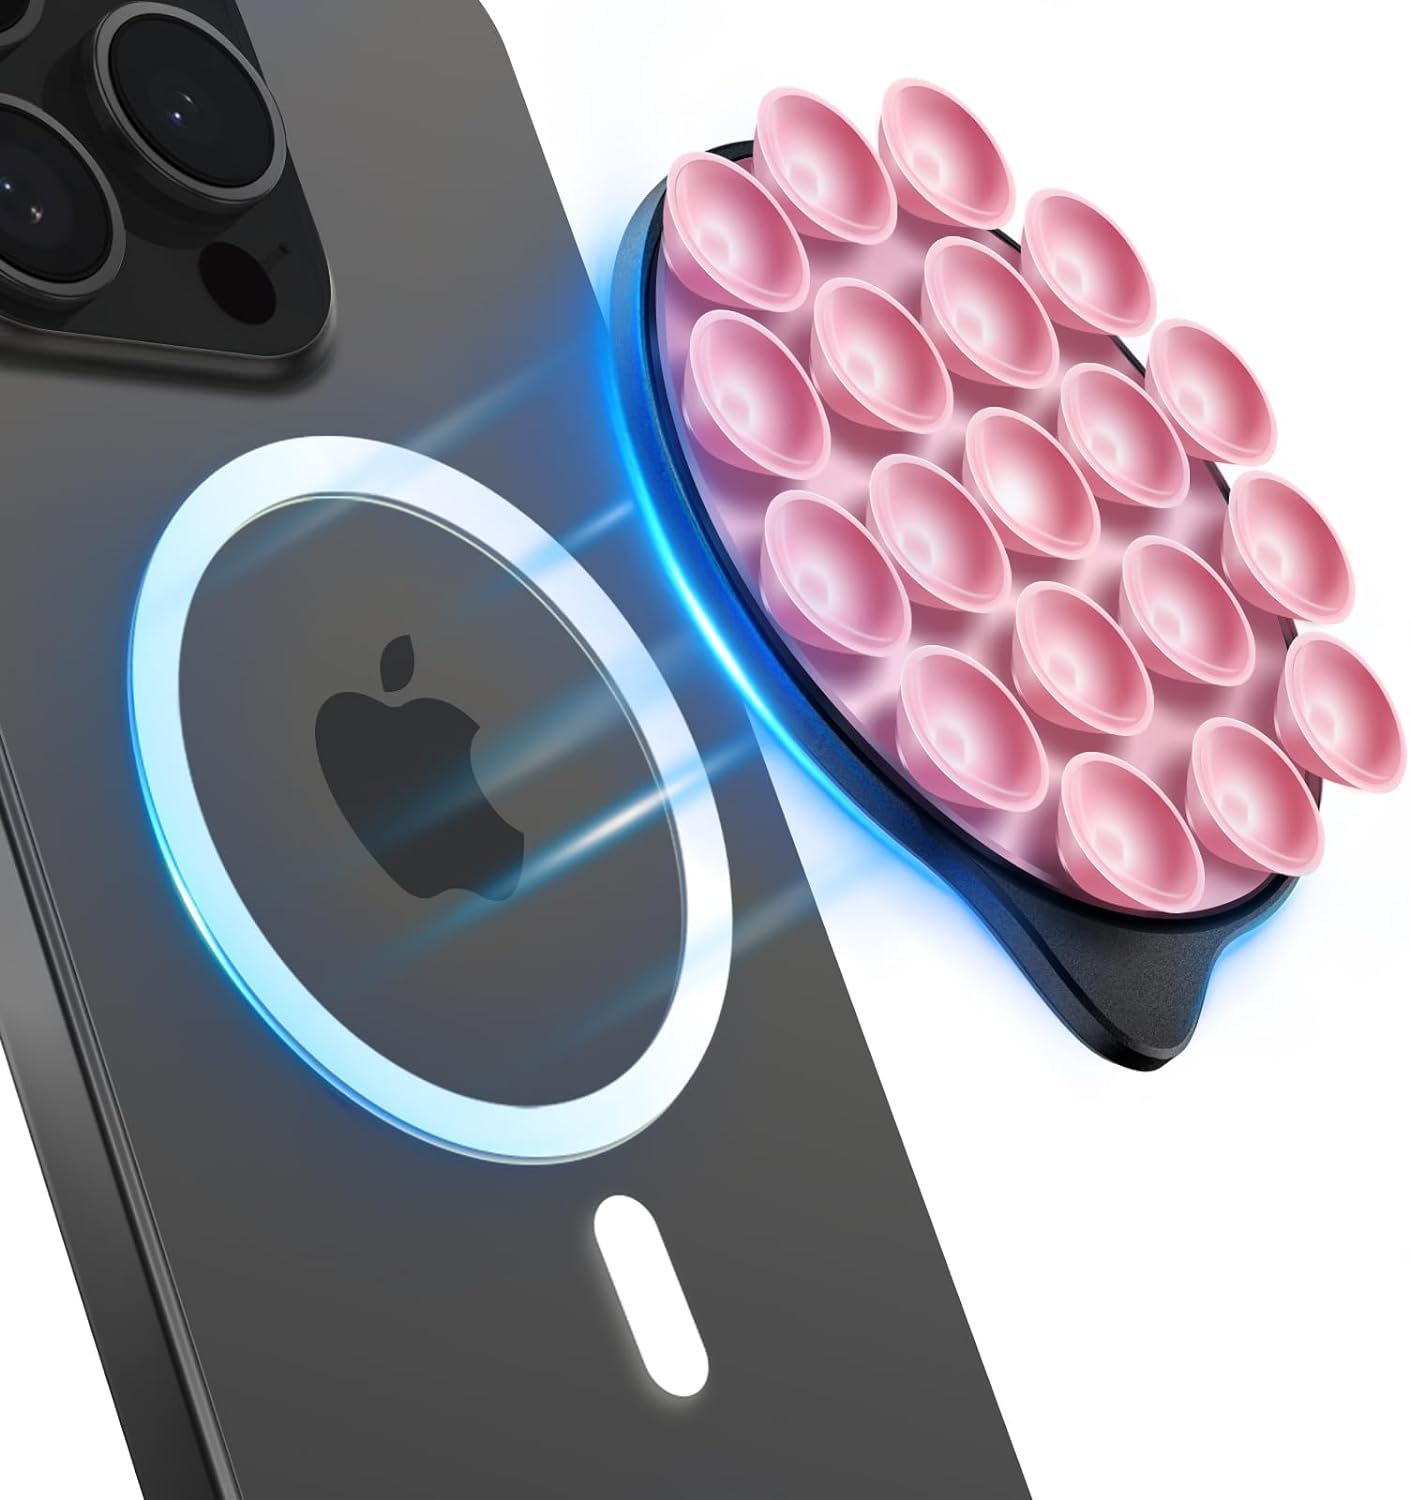 MagSuction Silicone Suction Cup Phone Mount for MagSafe (Black & Pink)